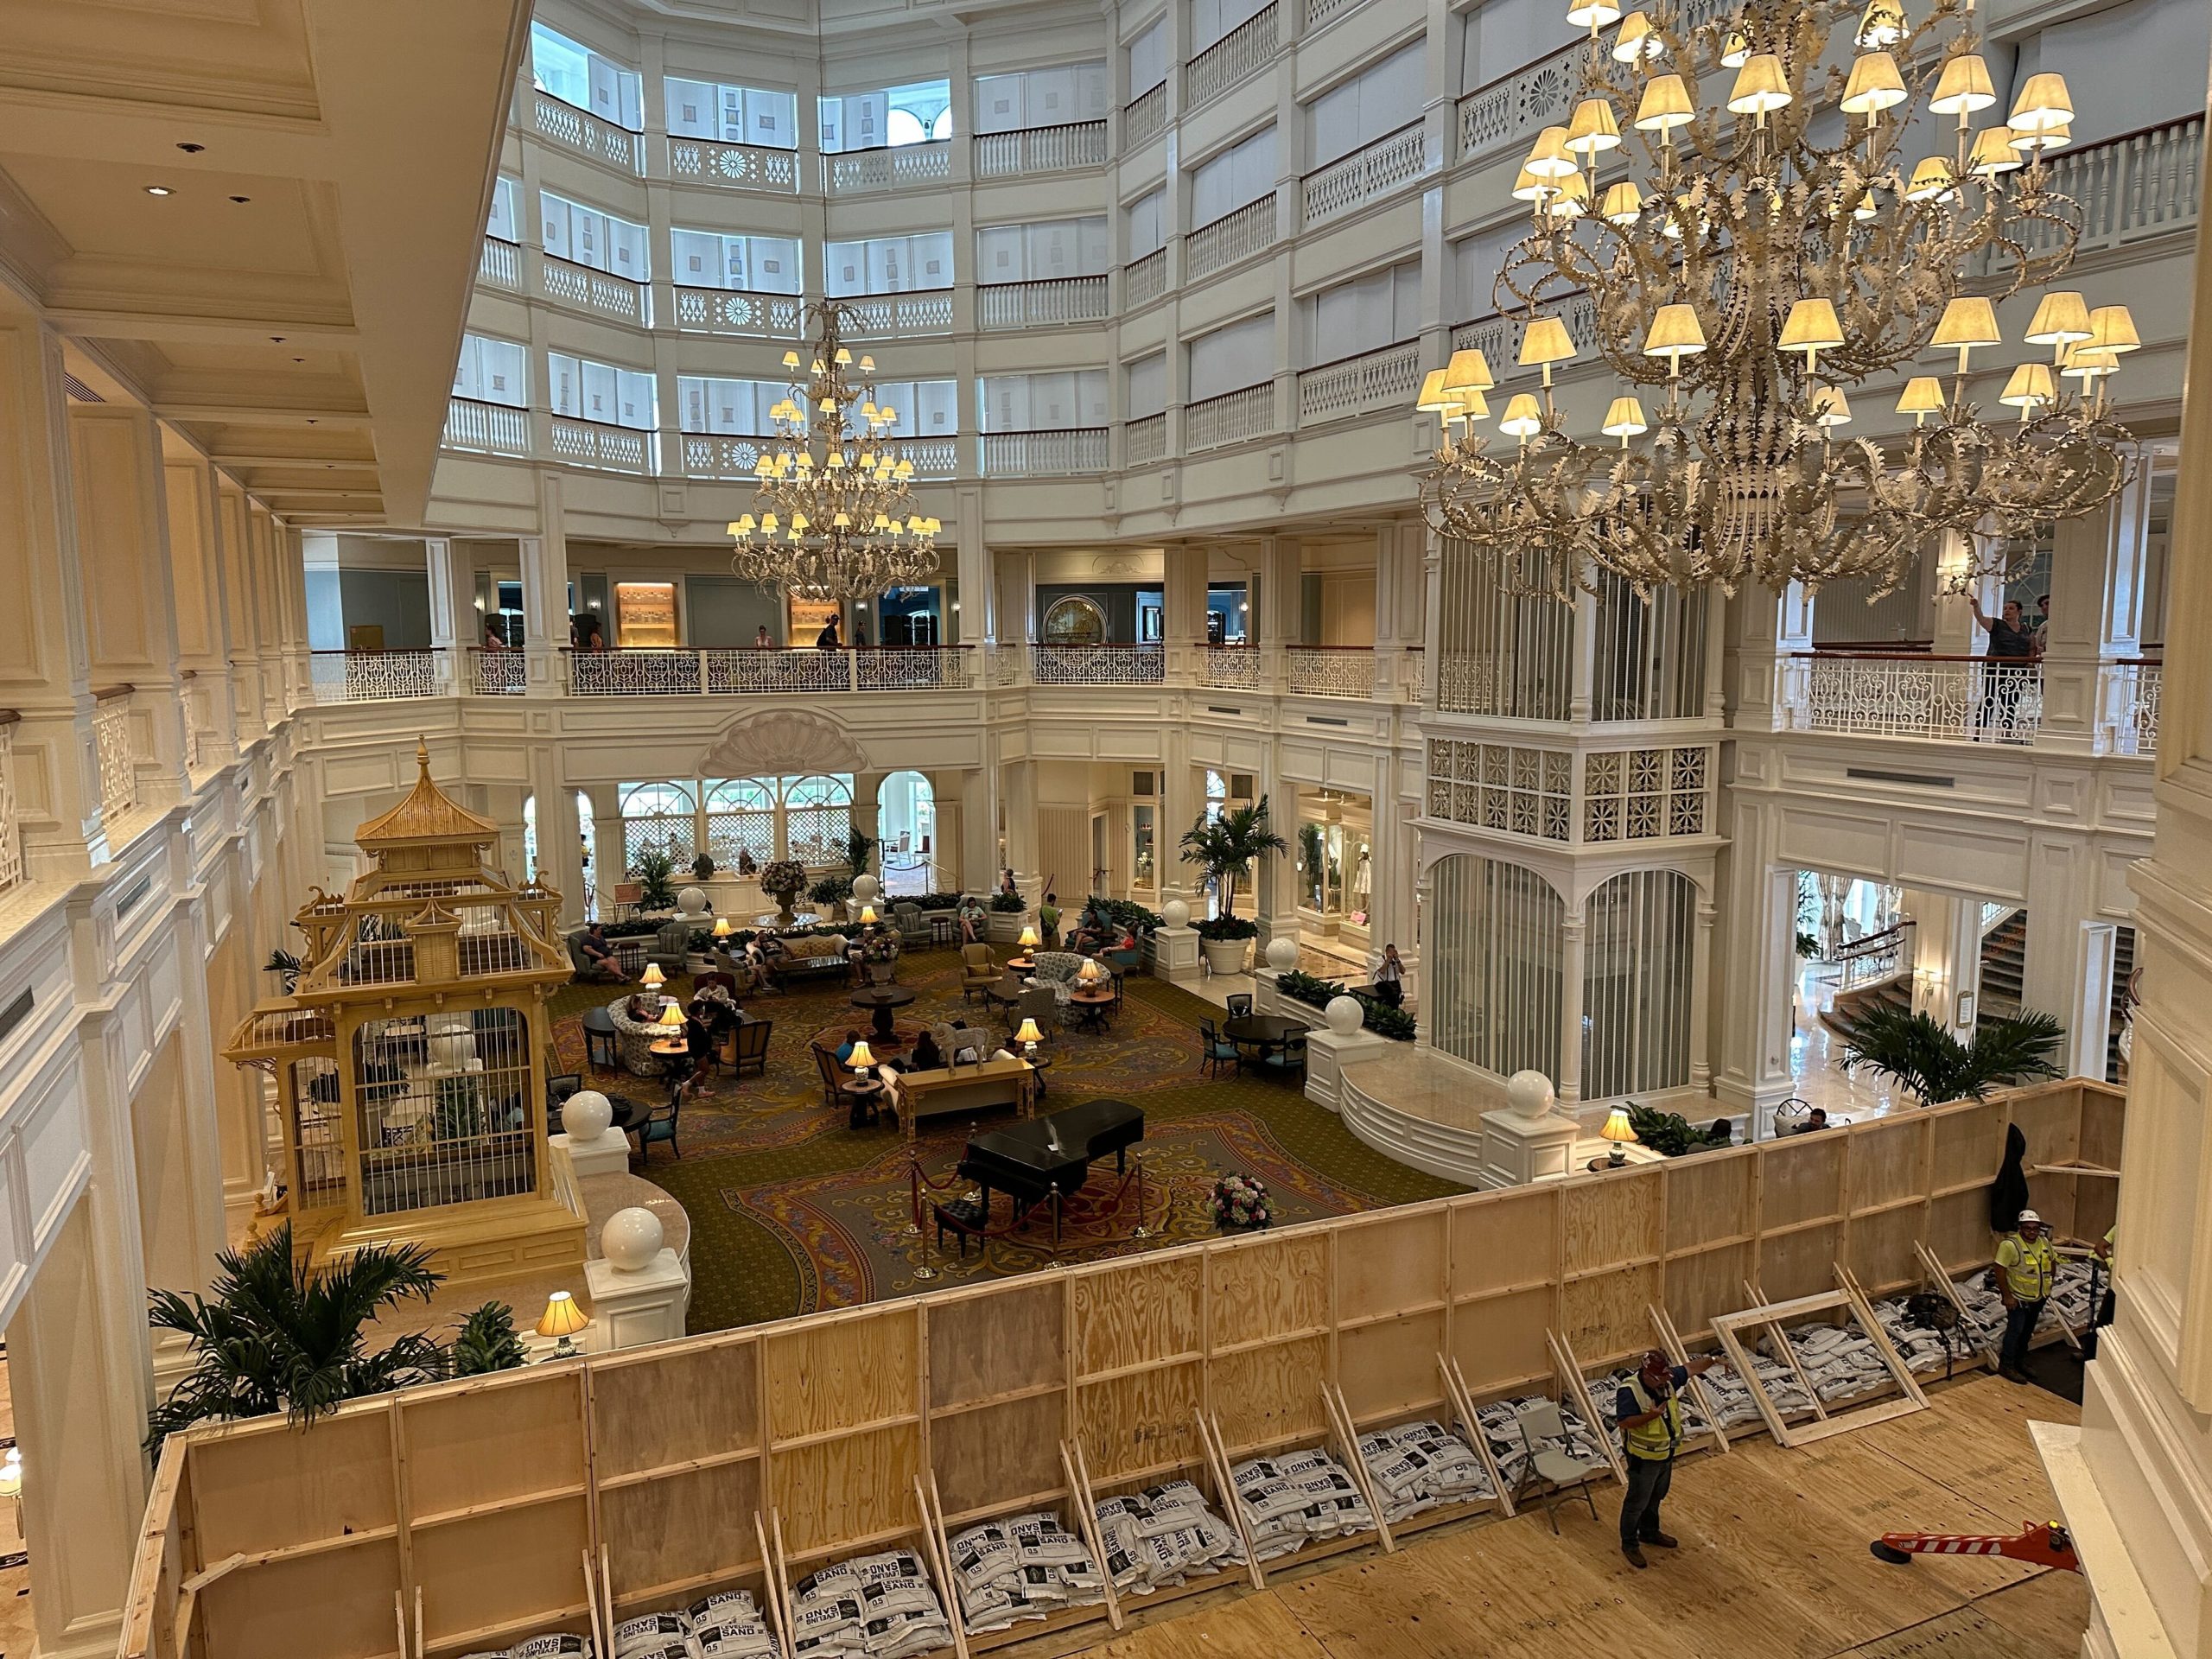 Construction Update Work Continues at Disney's Grand Floridian Resort